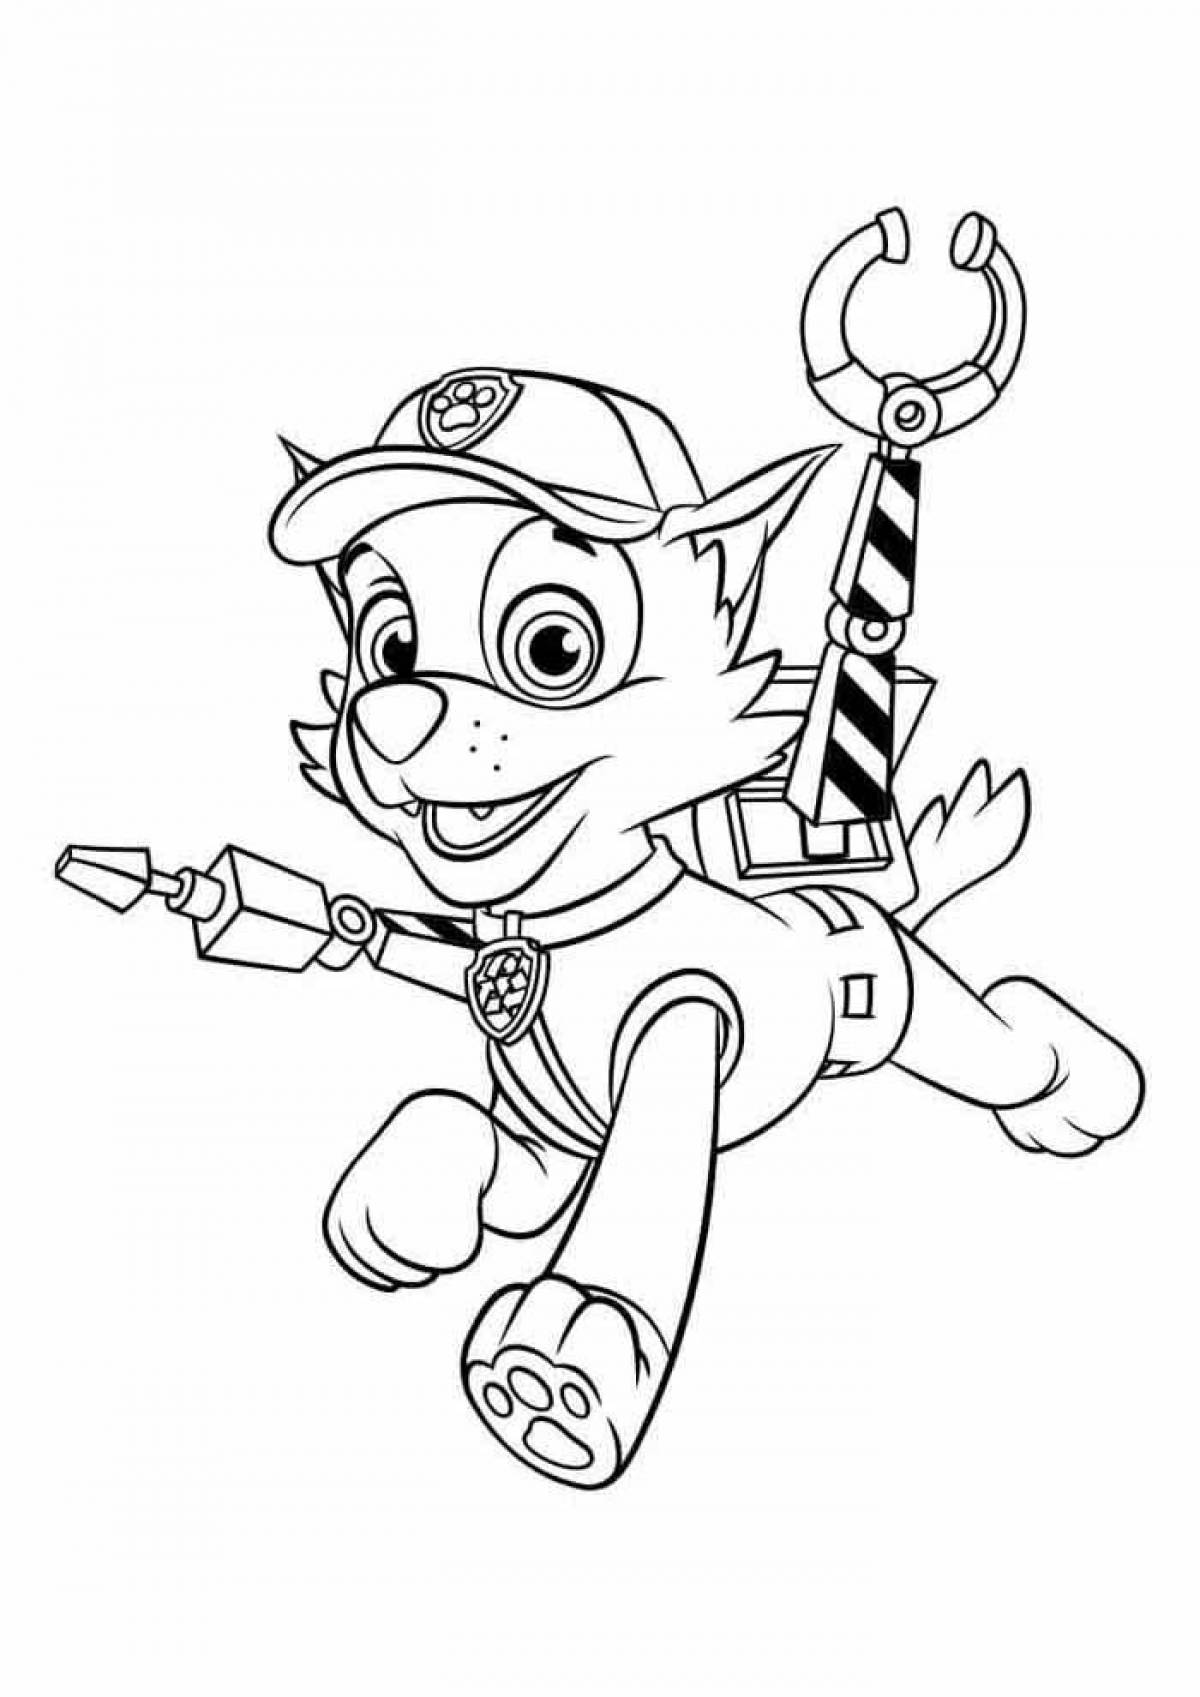 Rocky Paw Patrol Coloring Page